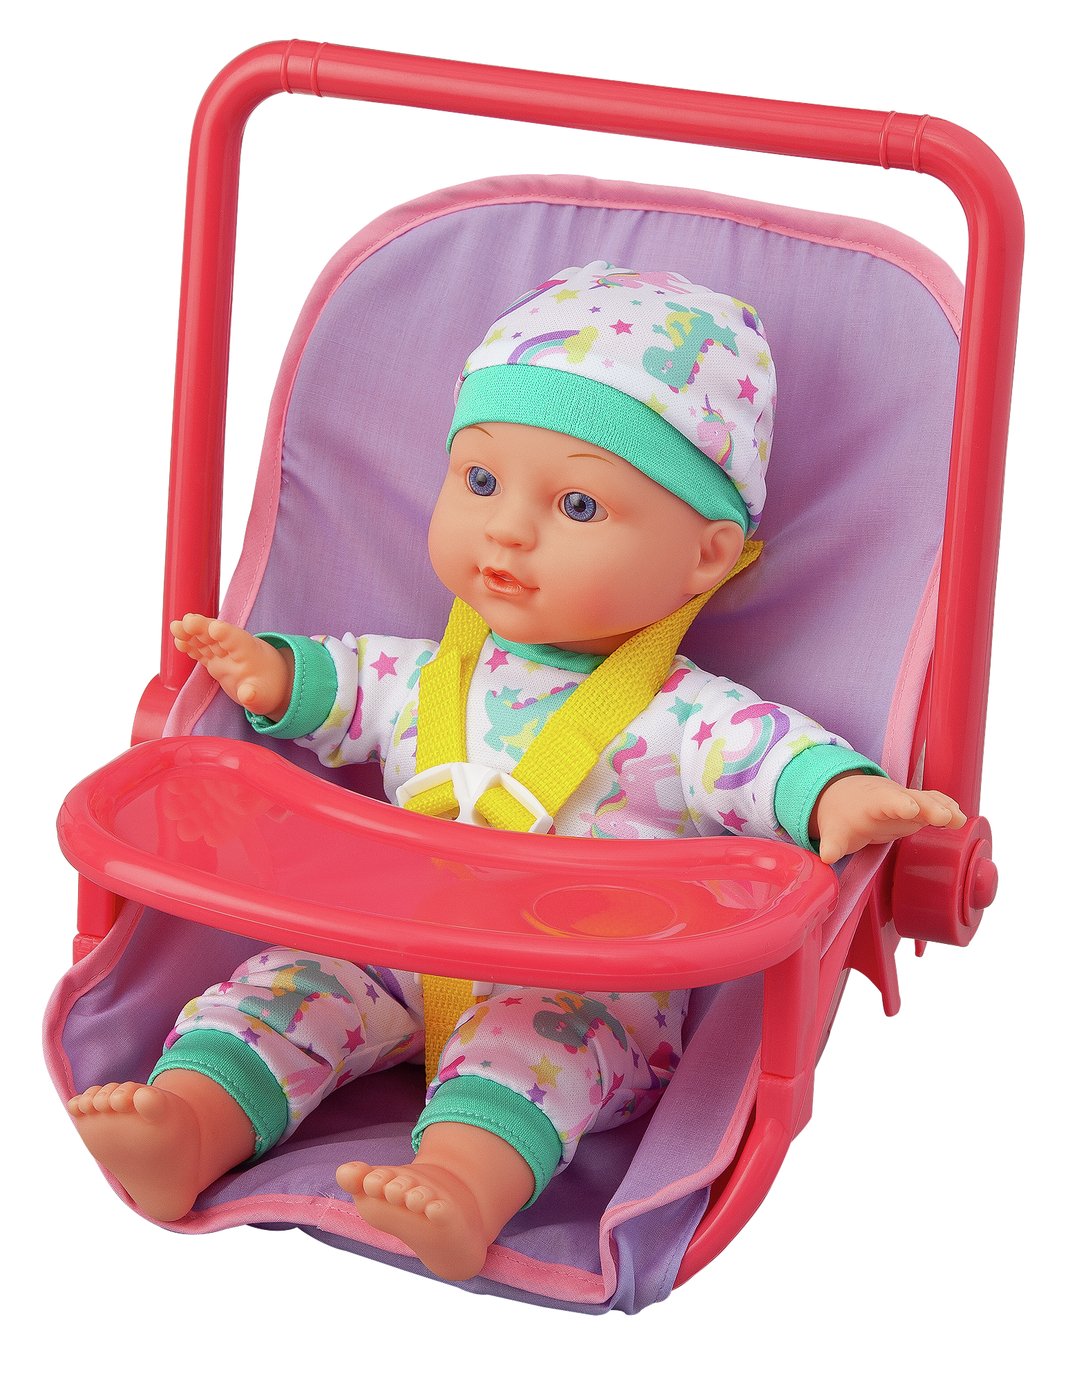 Chad Valley Babies To Love 4 In 1 Dolls Activity Unit Reviews